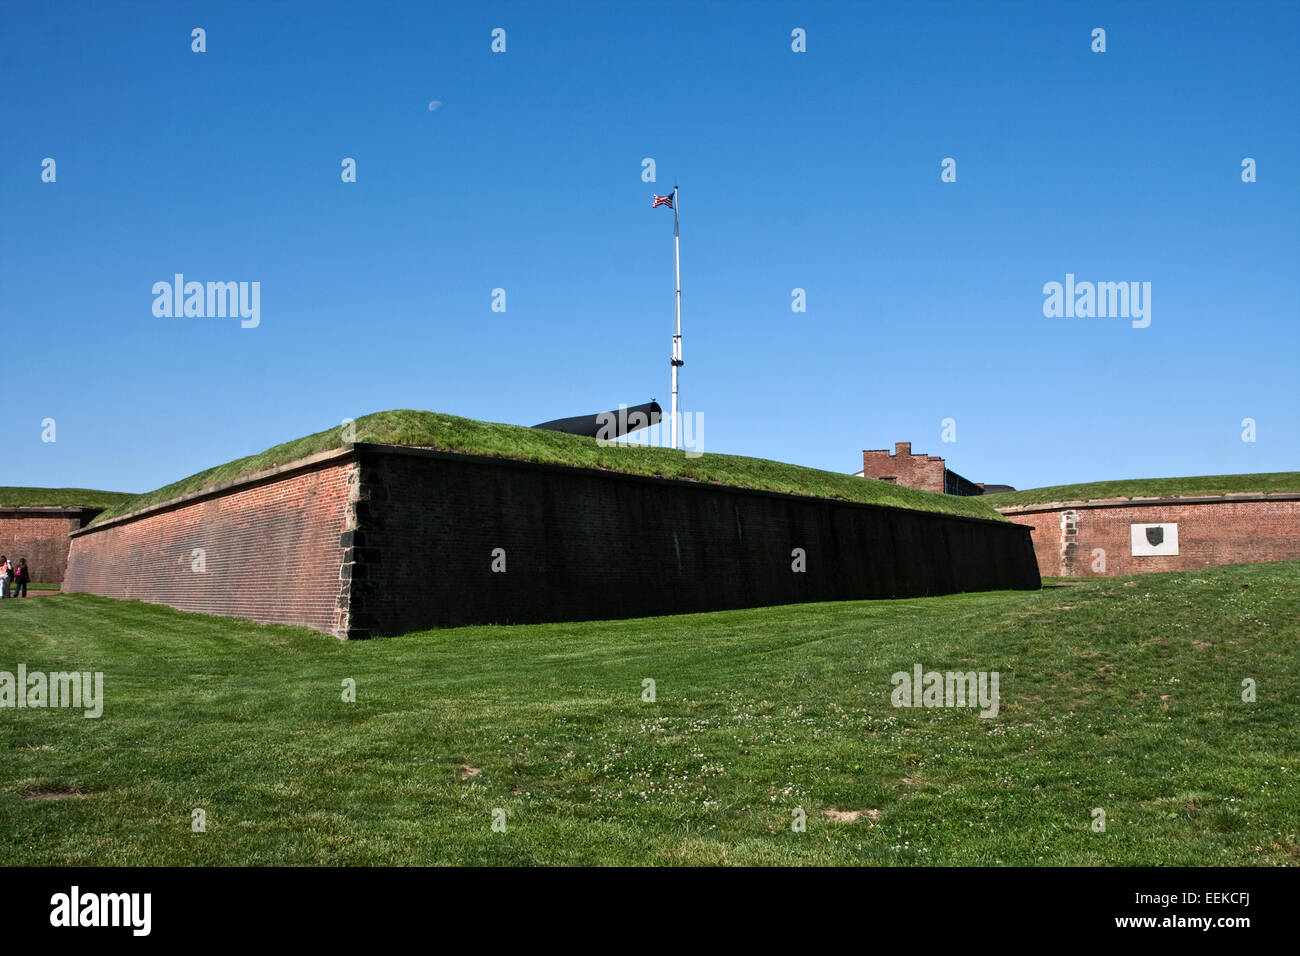 Fort McHenry National Monument and Shrine, Baltimore, Maryland. A lone cannon sticks out over the edge of the fortress walls. Stock Photo